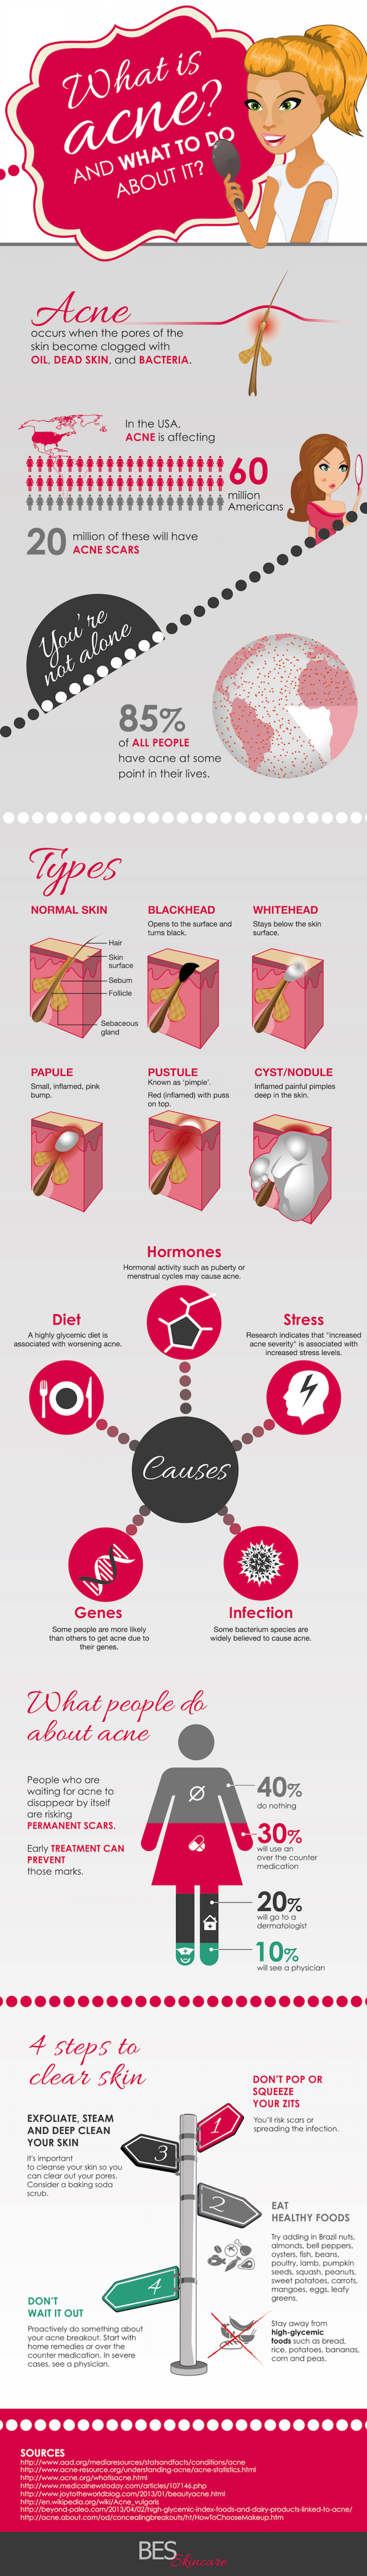 How Acne Works (And What To Do About It) Infographic